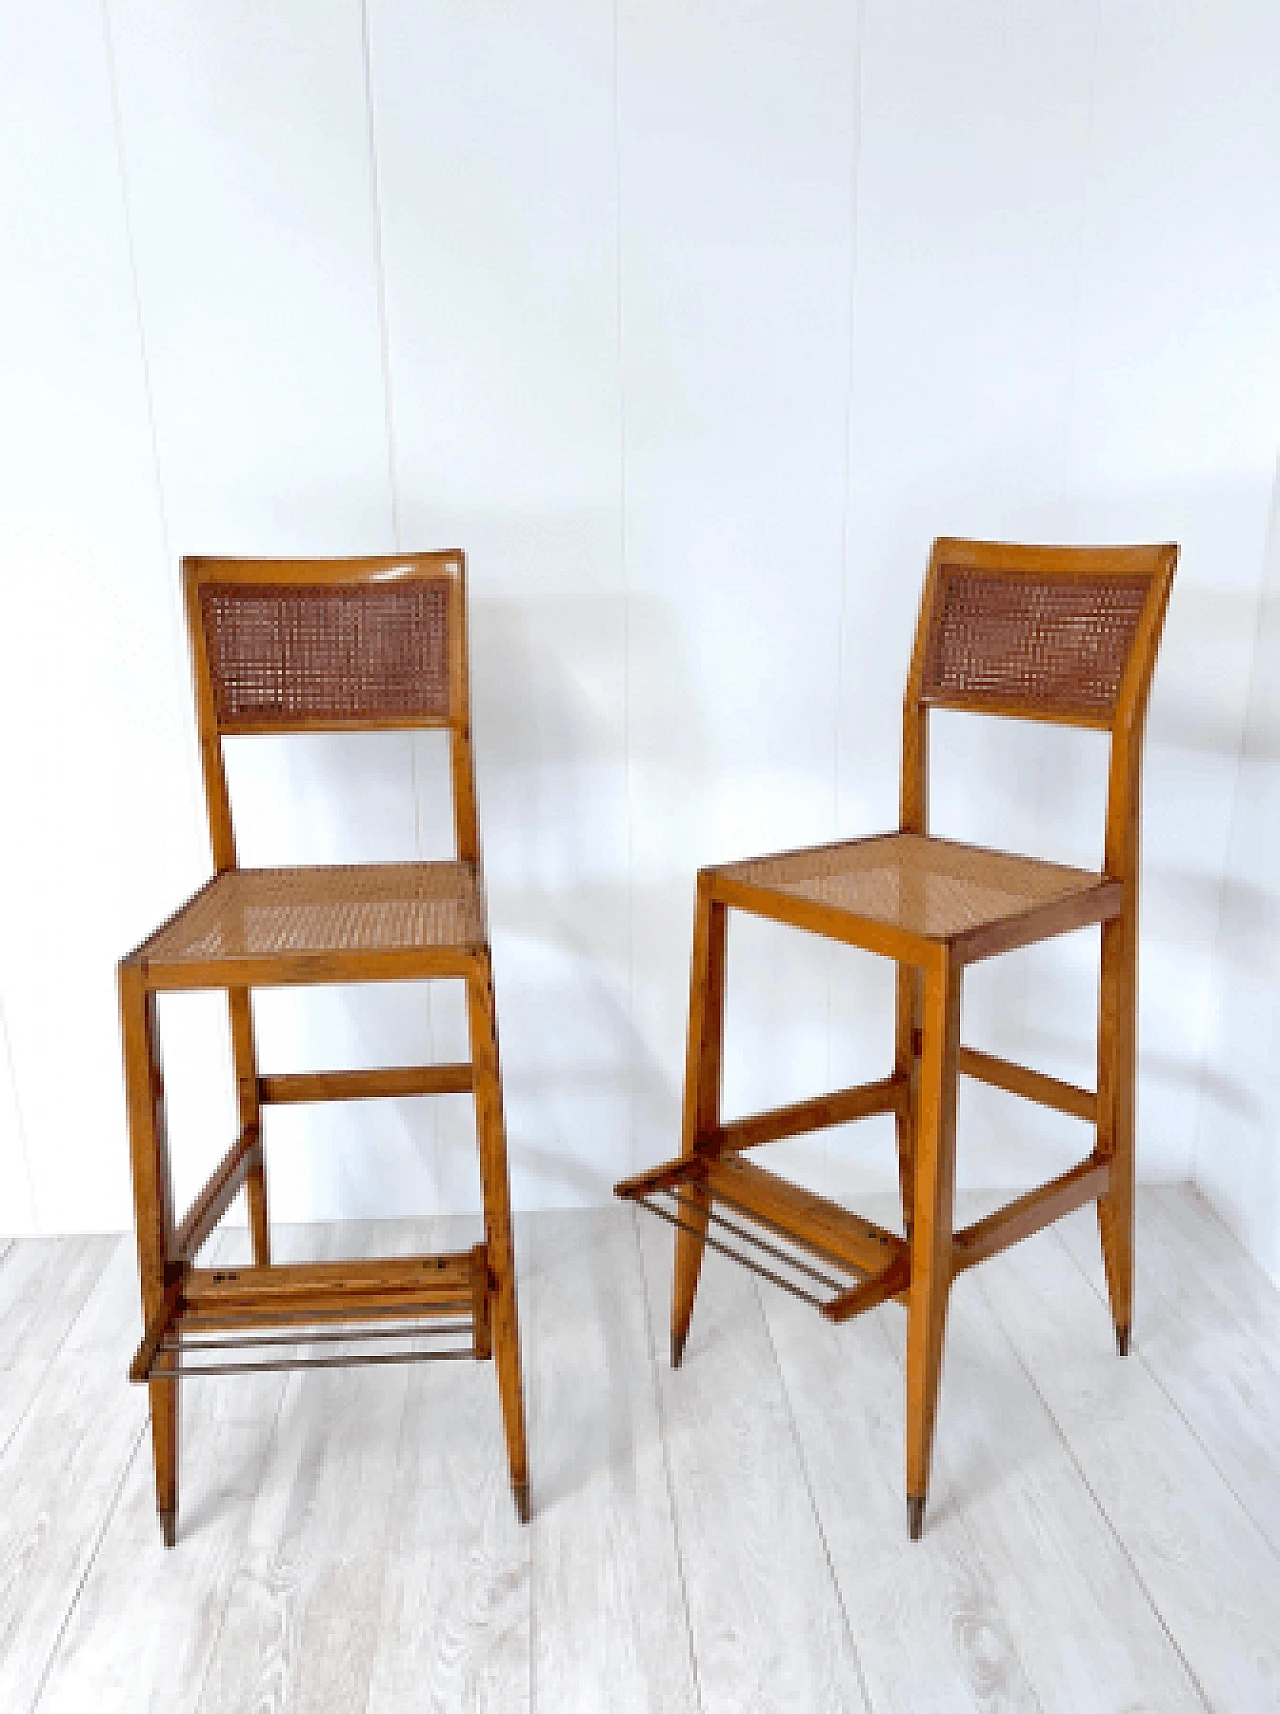 Pair of croupier stools by Gio Ponti for the Sanremo Casino, 1950s 12